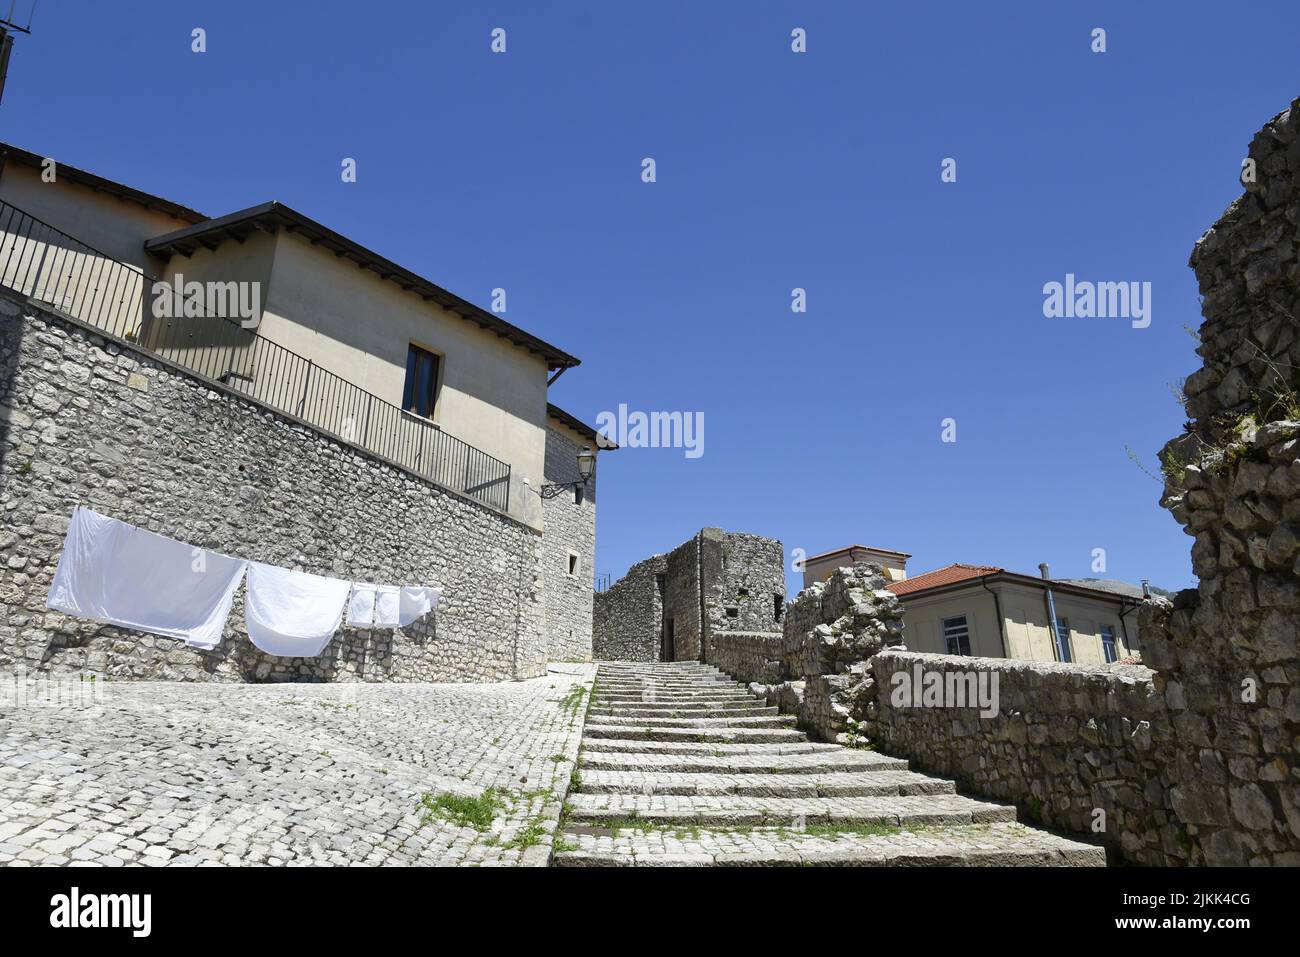 A street between old medieval stone buildings in Italy. Stock Photo